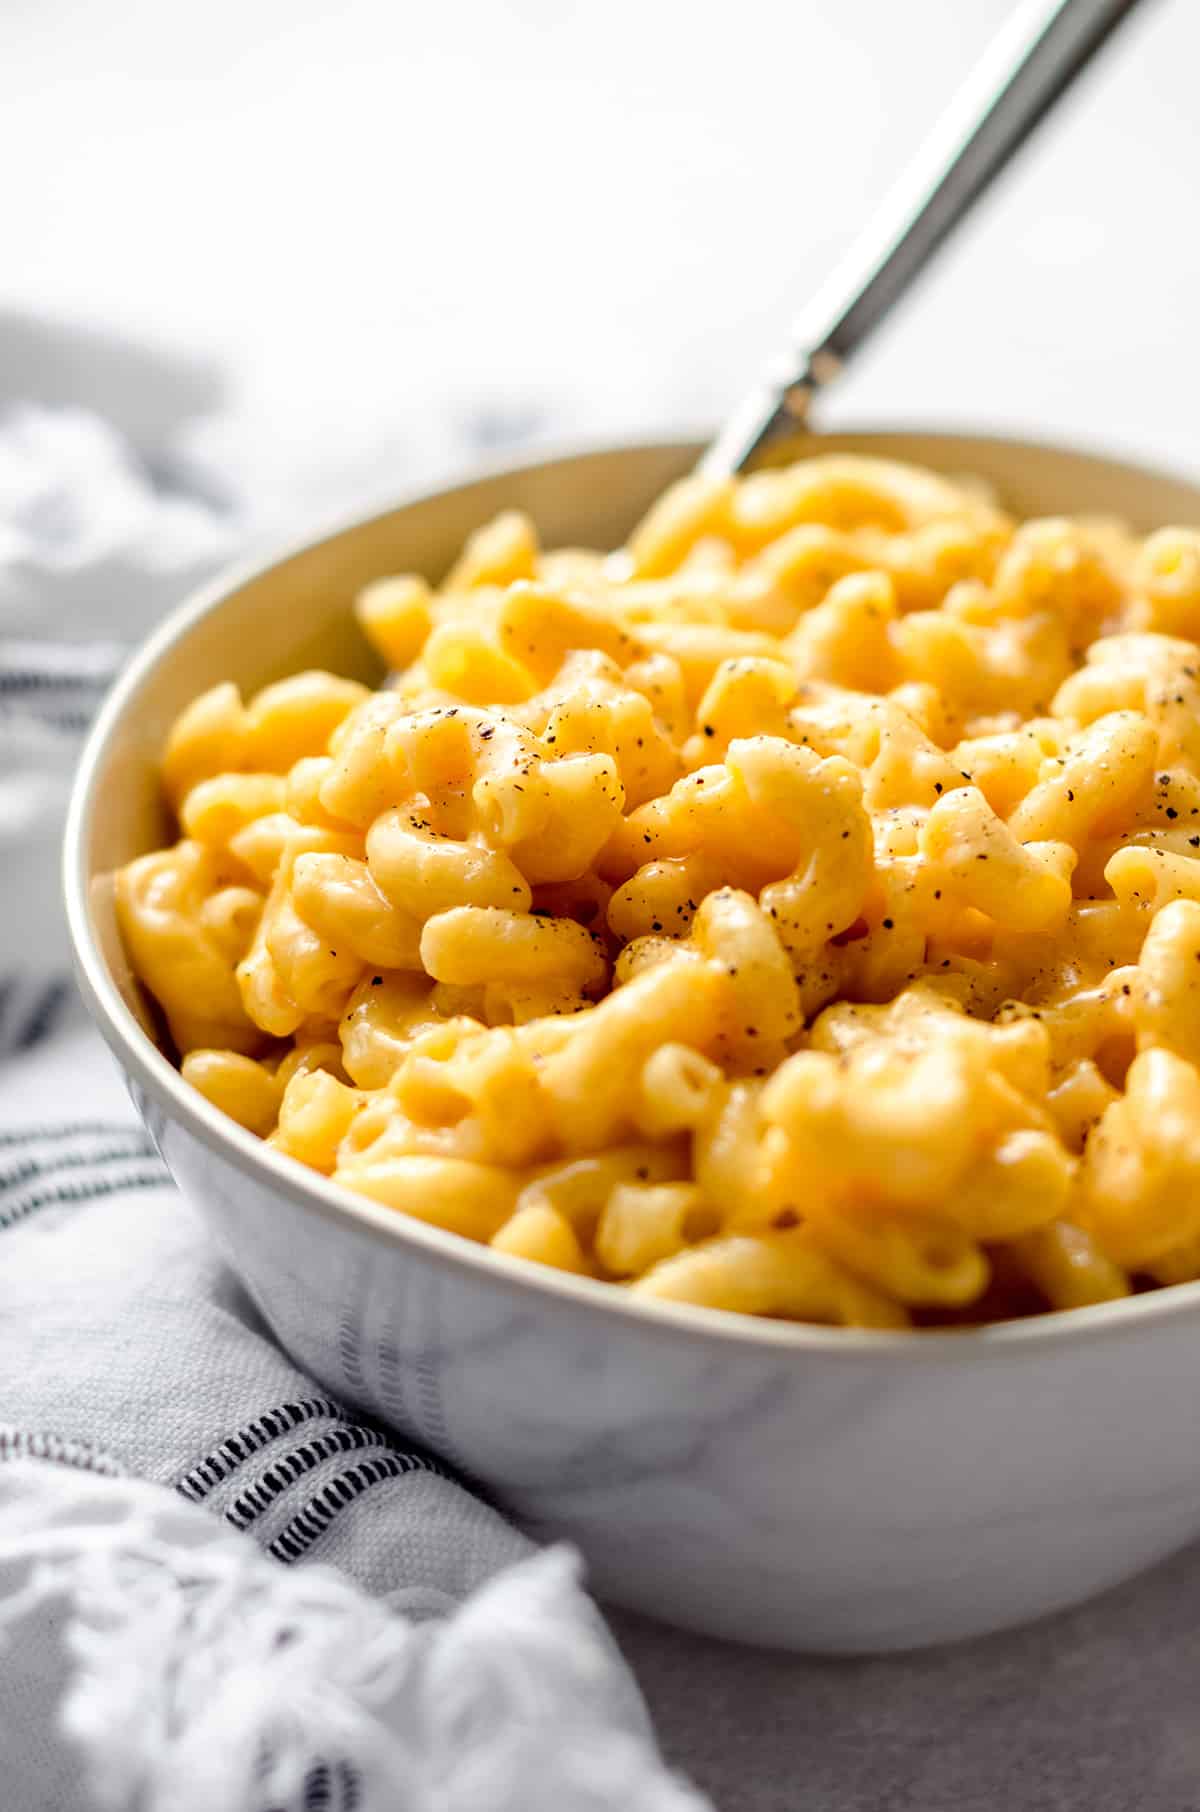 A bowl of macaroni and cheese with a fork sticking out.